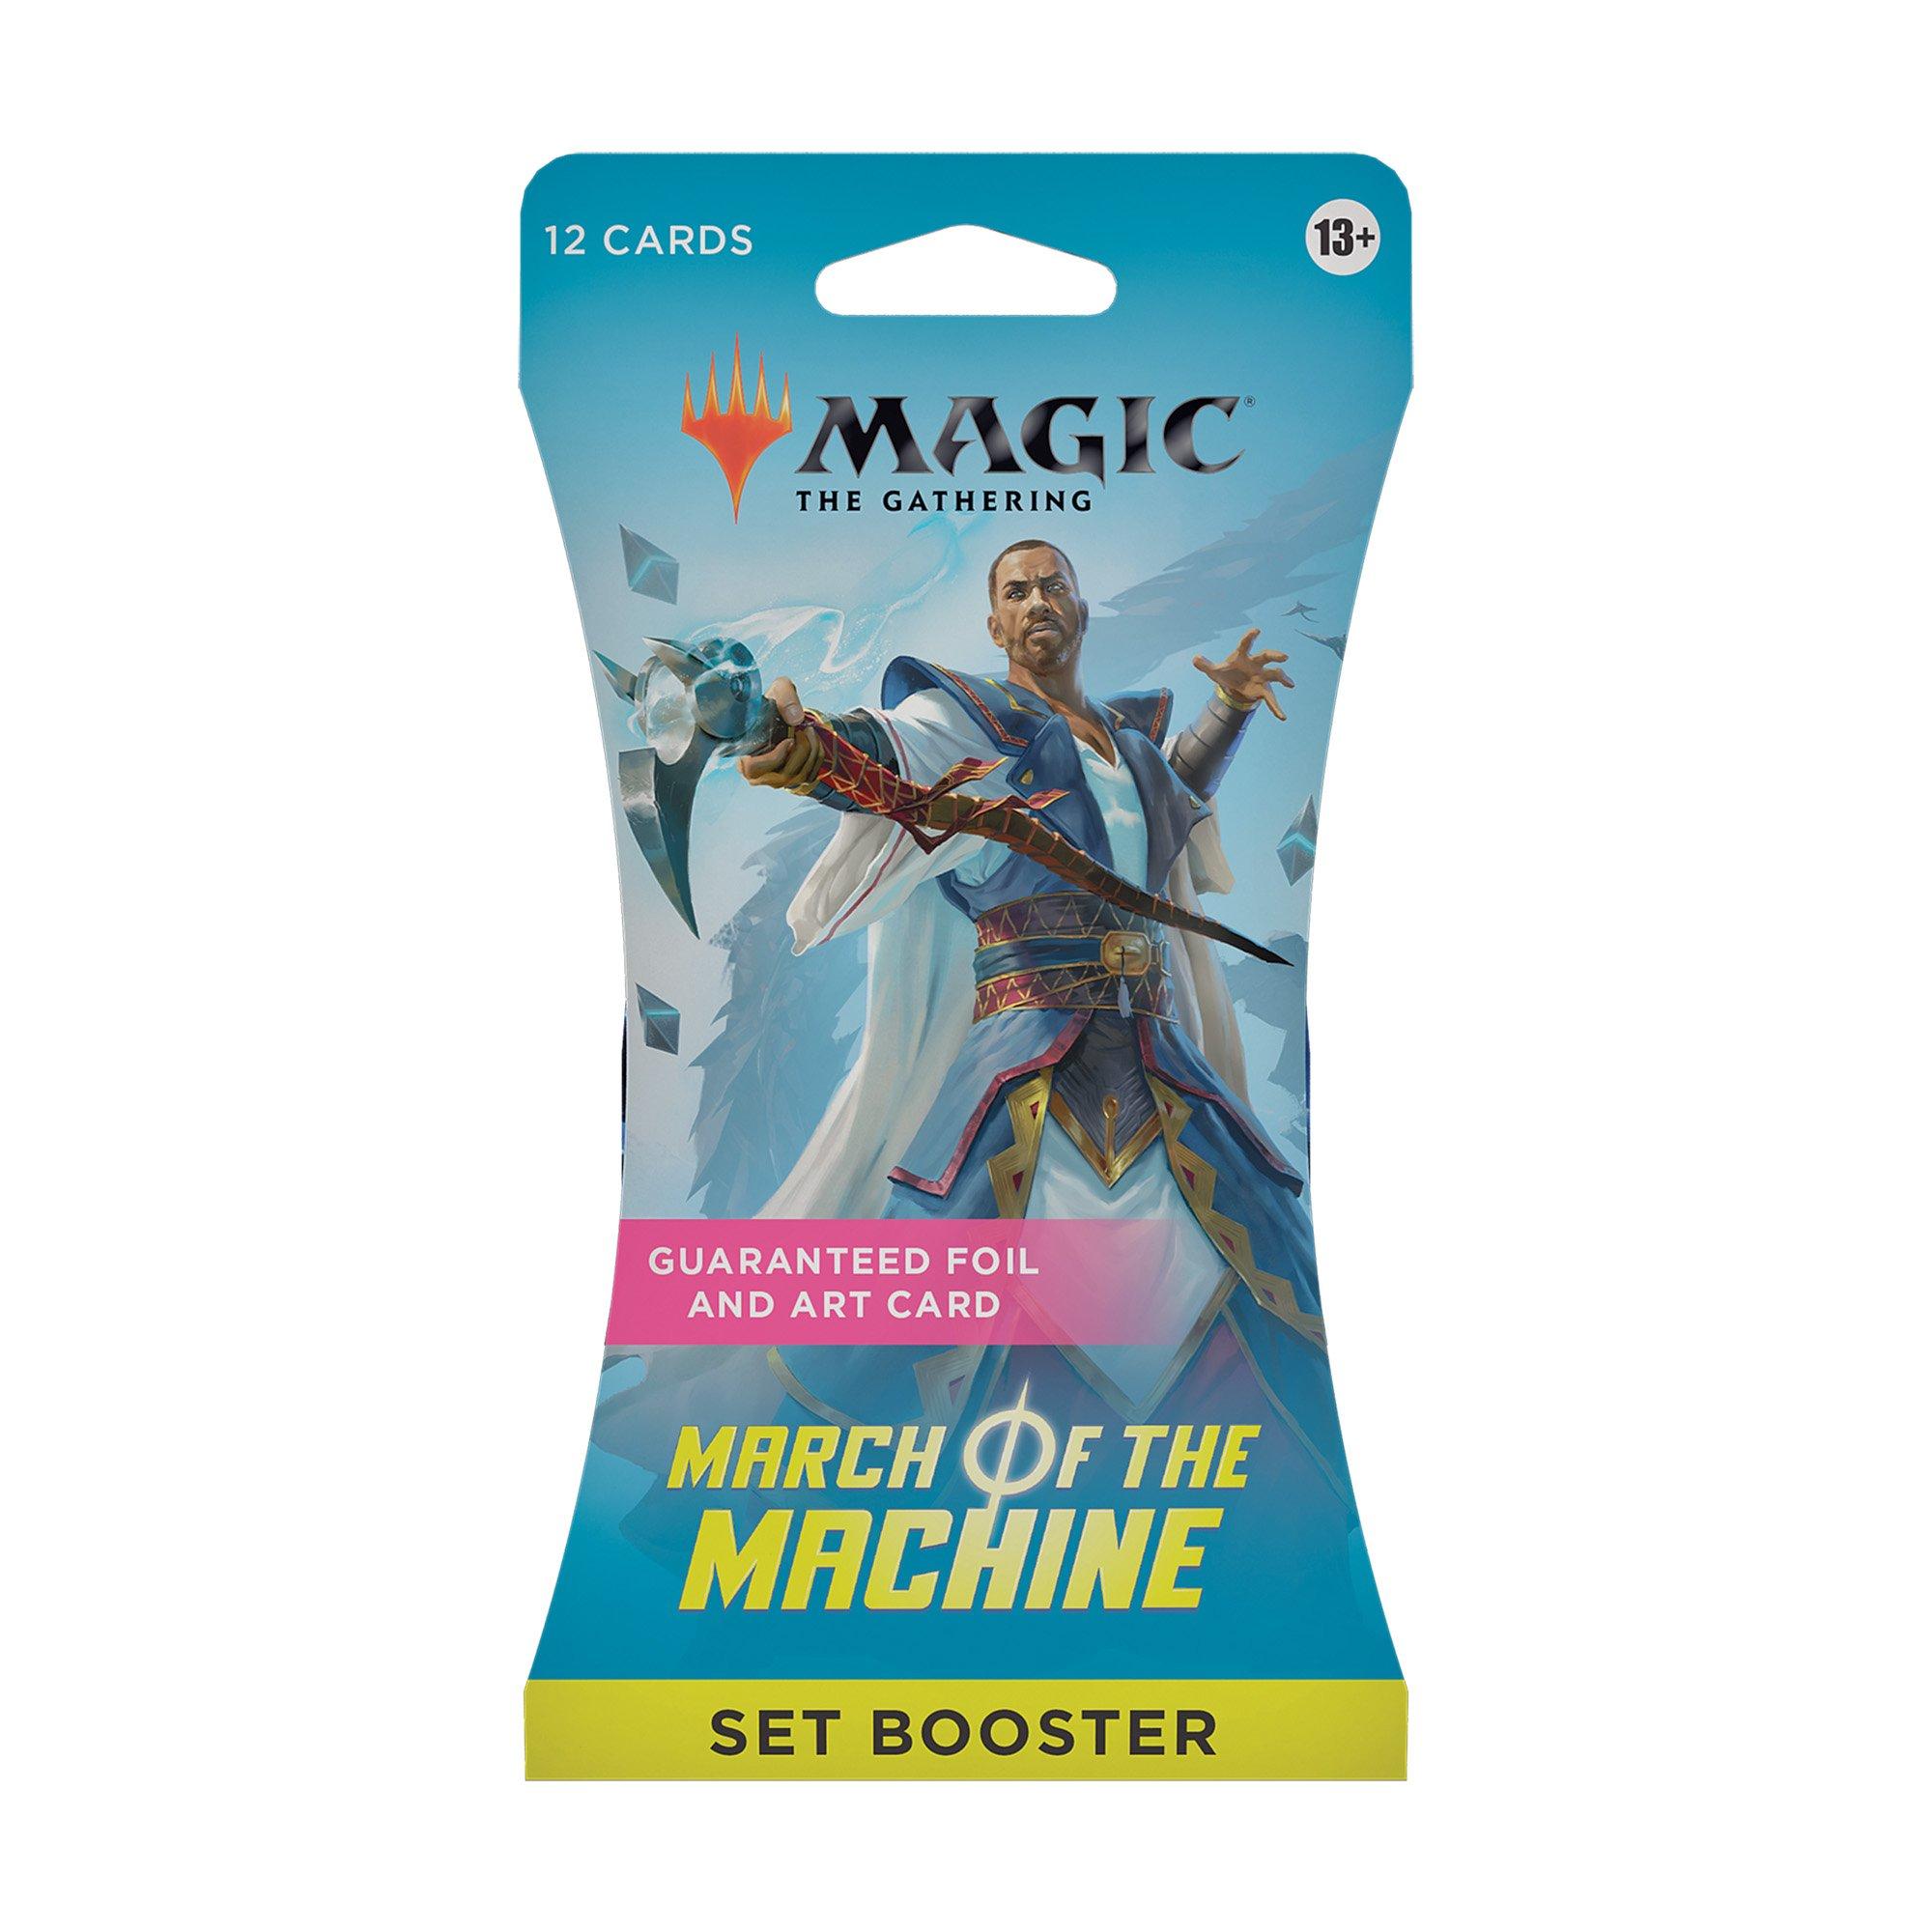 Wizards of the Coast Magic: The Gathering March of the Machine Set Booster